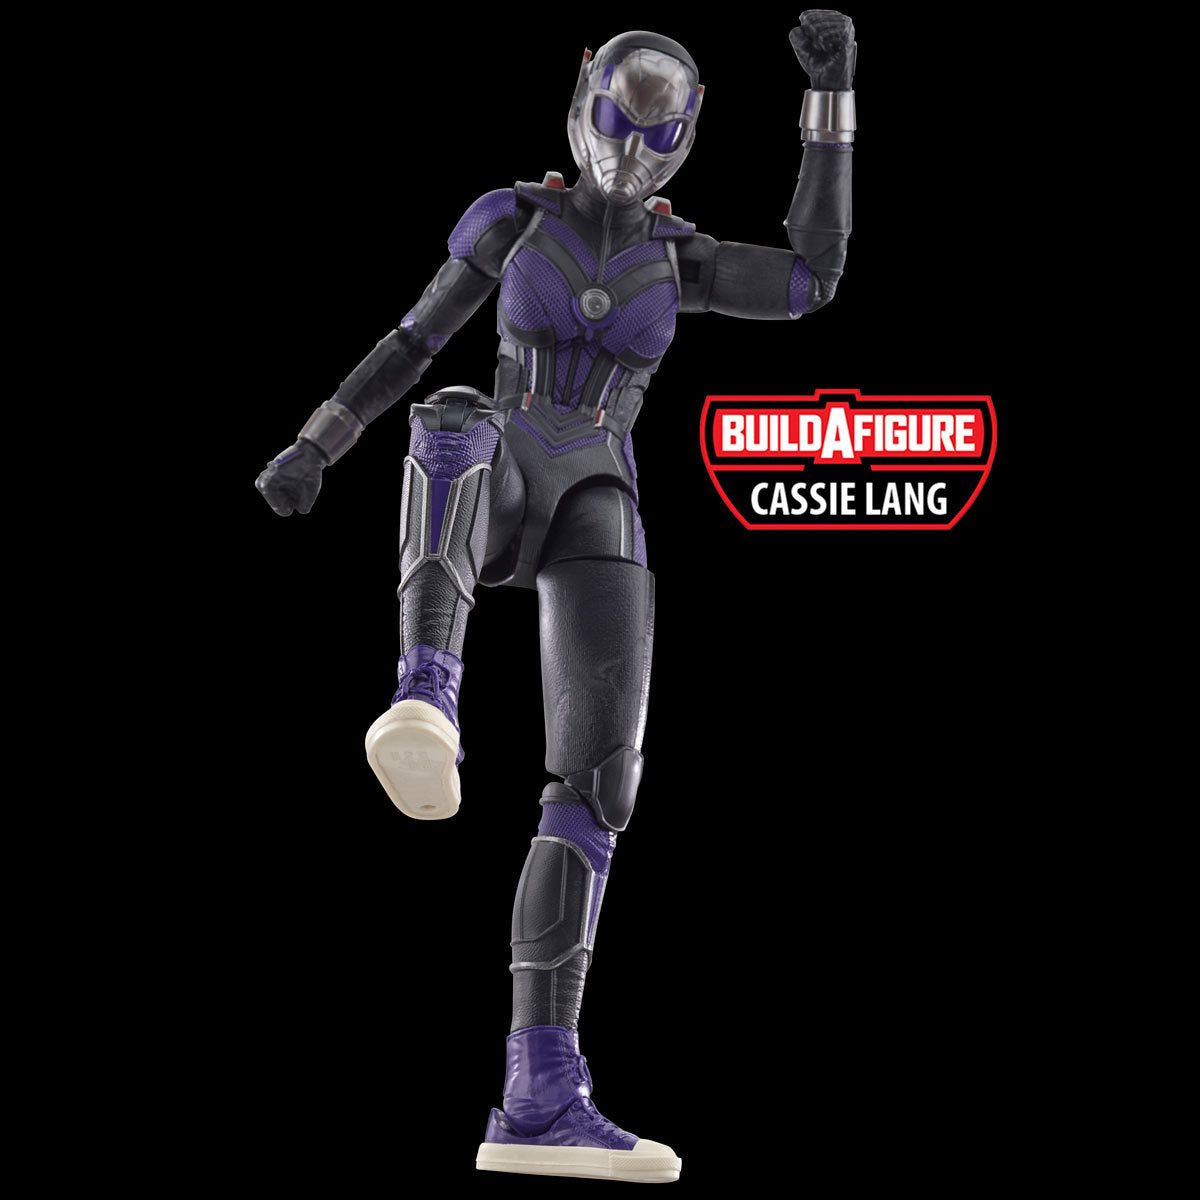 Ant-Man & The Wasp: Quantumania Marvel Legends Kang the Conqueror Hasbro